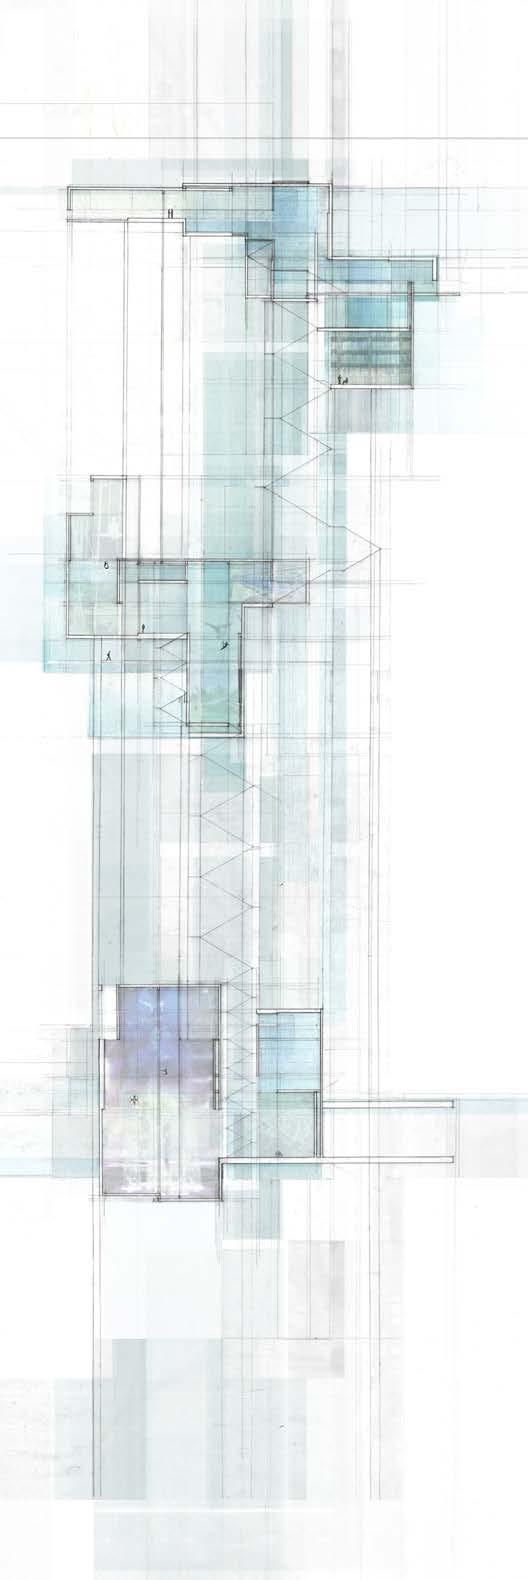 ARCHITECTURAL DESIGN 4 Spring 2012 + Spring 2014 VERTICAL DATUM + HORIZONTAL DATUM [4 weeks each] The primary issues